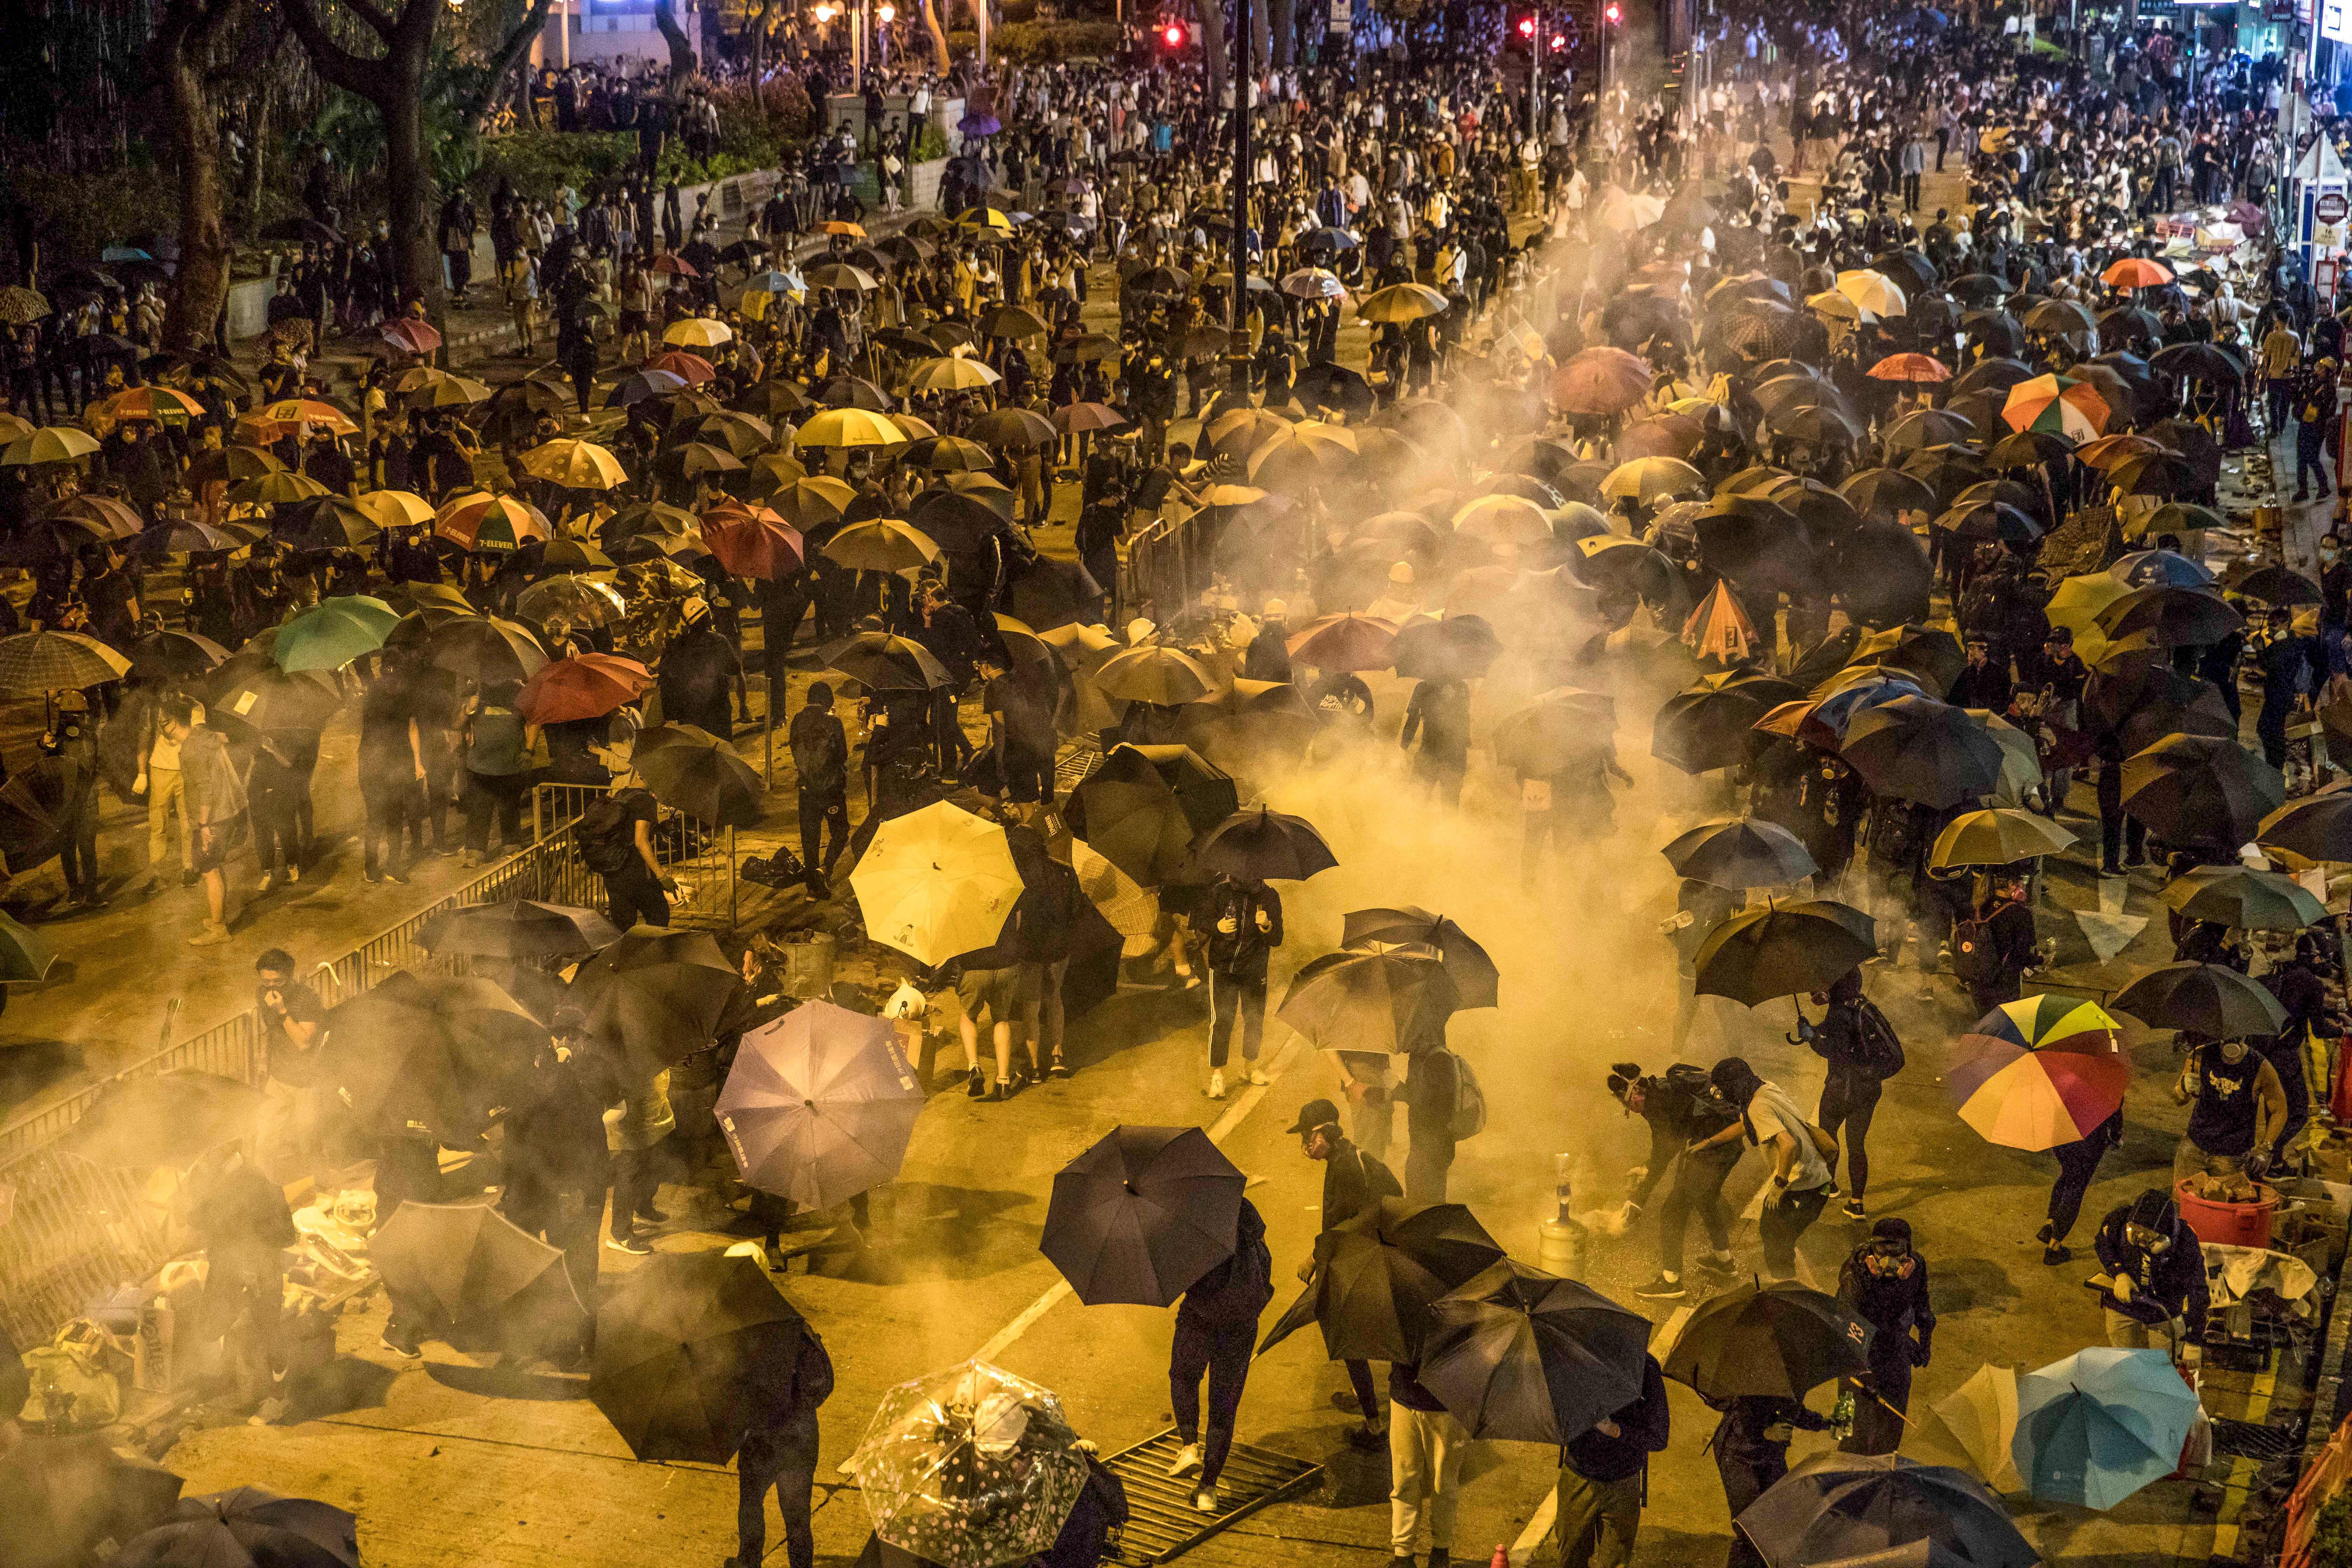 Protesters react as police fire tear gas while they attempt to march towards Hong Kong Polytechnic University in Hung Hom district of Hong Kong on November 18